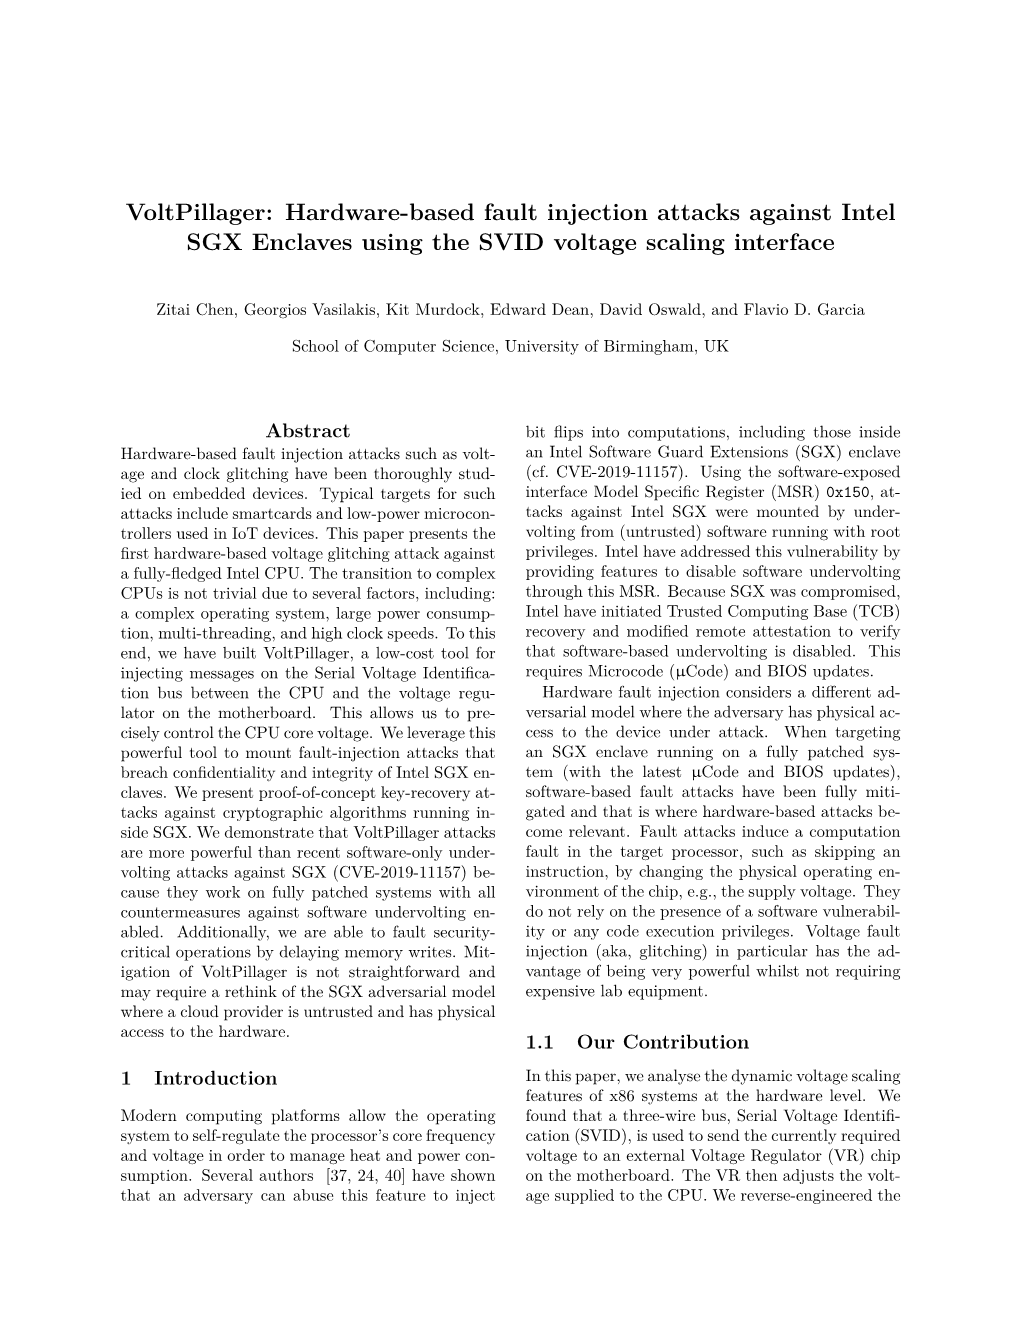 Voltpillager: Hardware-Based Fault Injection Attacks Against Intel SGX Enclaves Using the SVID Voltage Scaling Interface